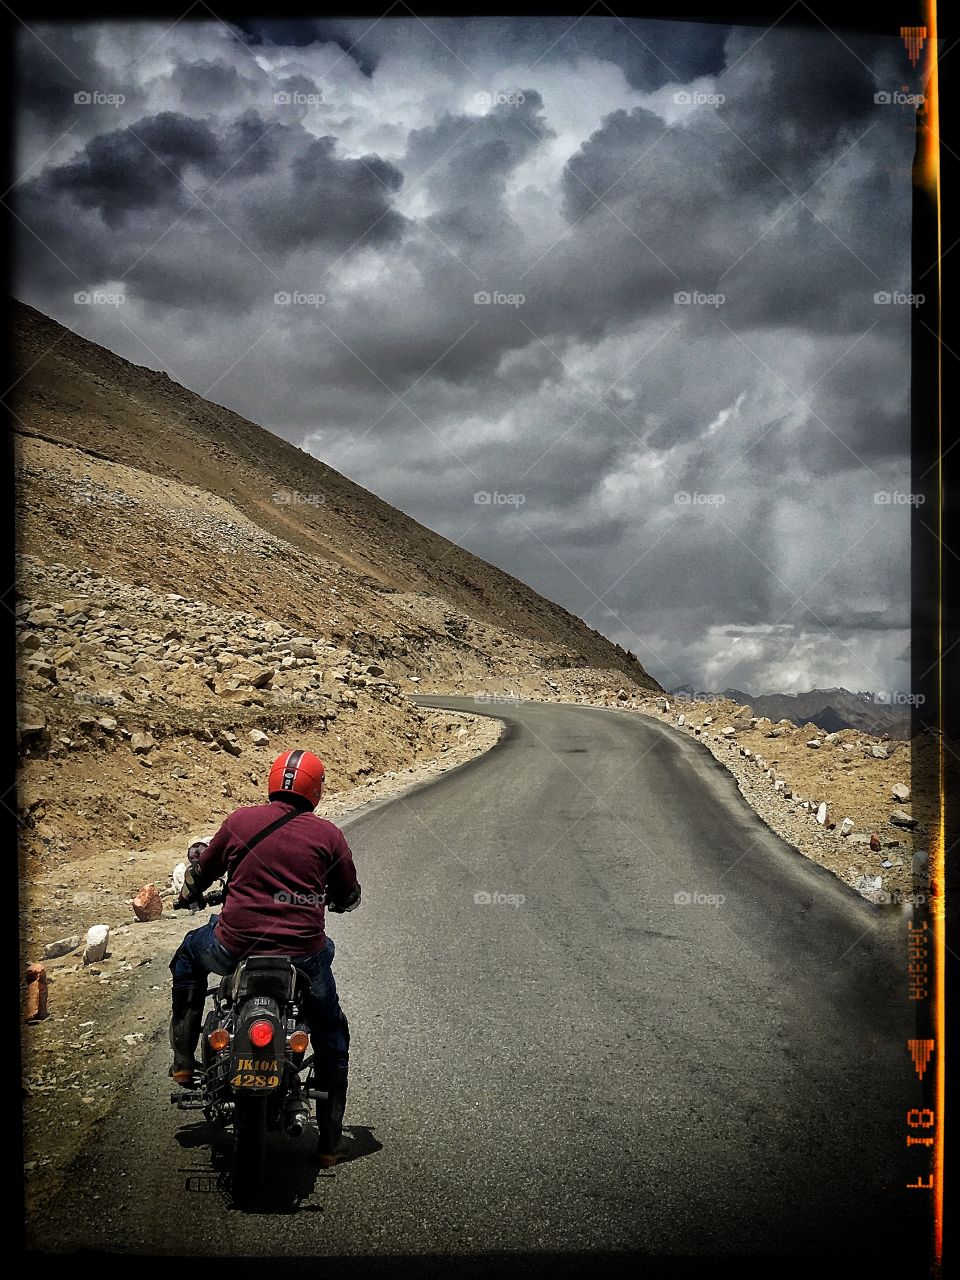 On the road - Ladakh expedition 2018